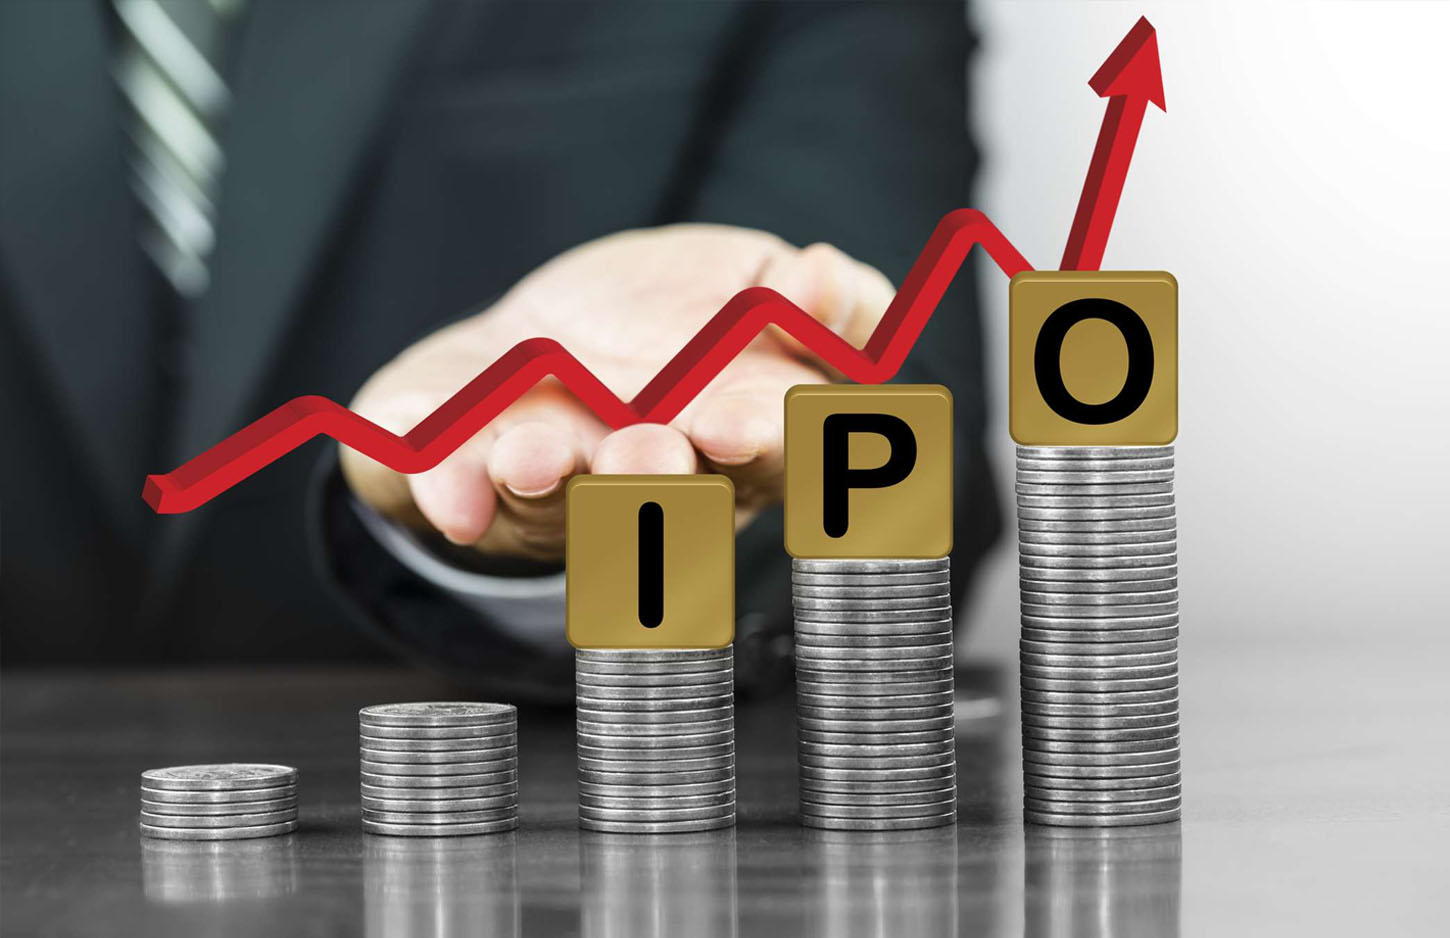 You can get a job in IPO